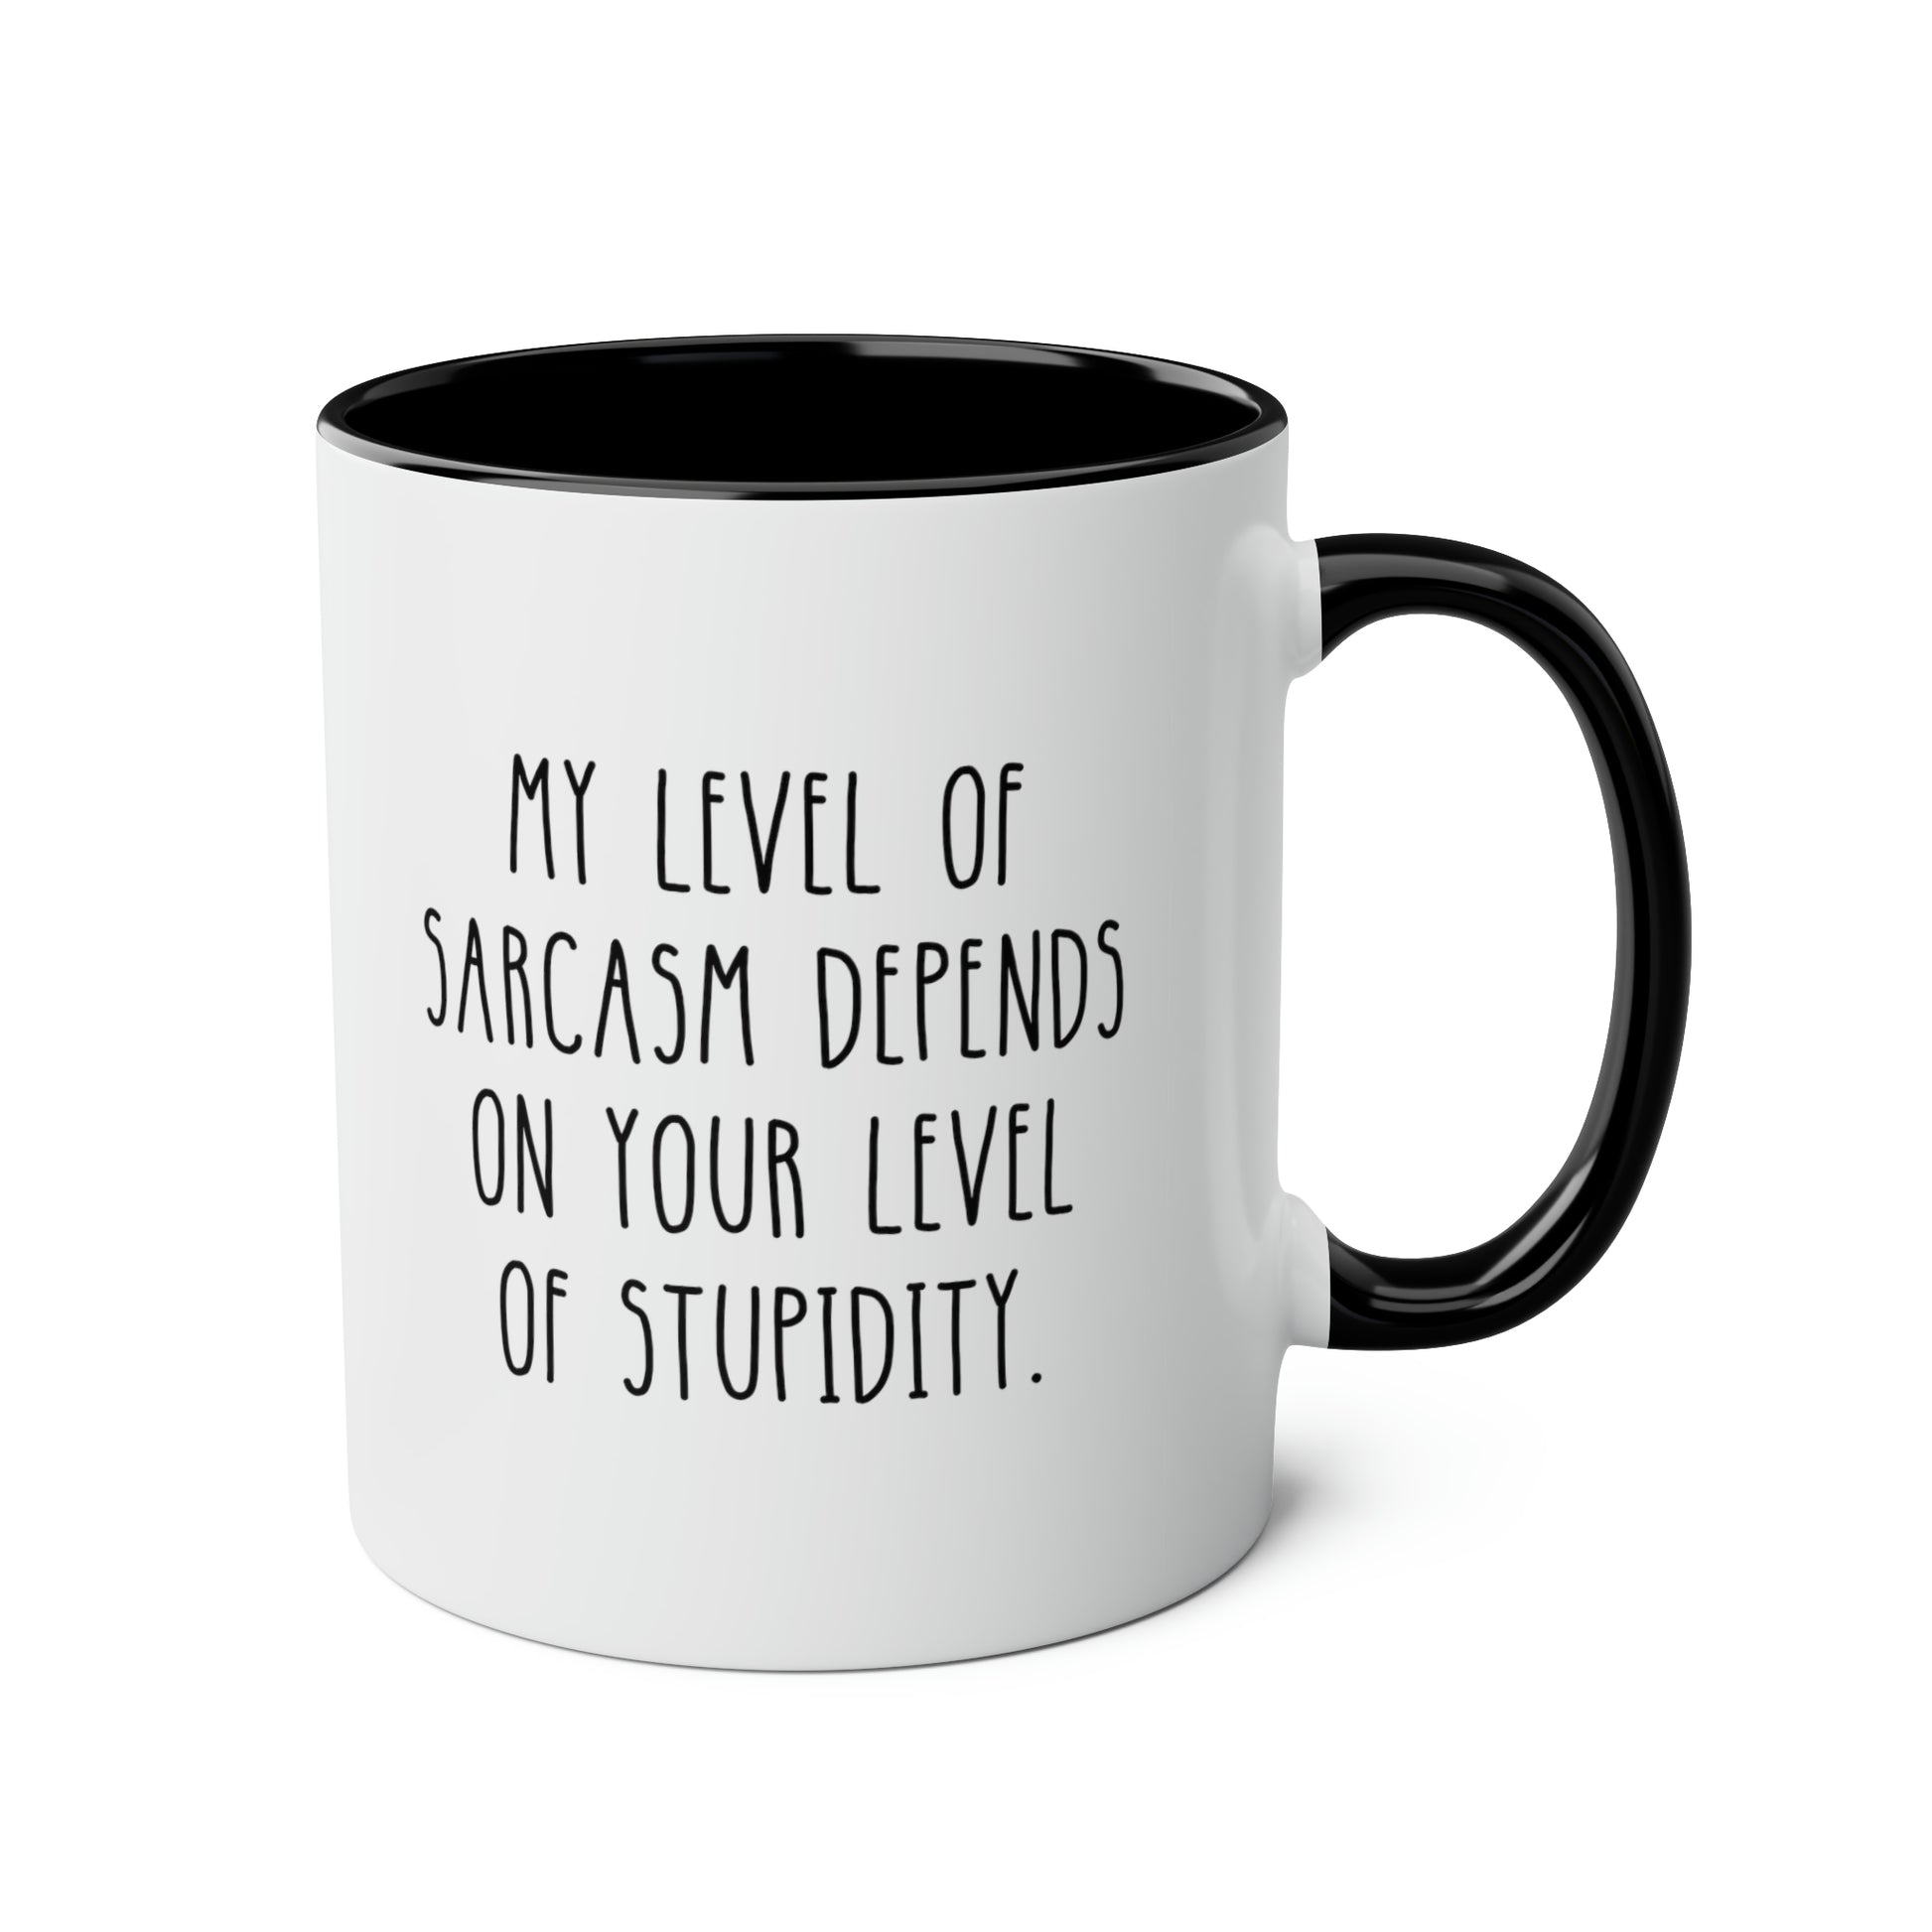 My Level Of Sarcasm Depends On Your Level Of Stupidity 11oz white with black accent funny large coffee mug gift novelty ceramic cup sarcastic waveywares wavey wares wavywares wavy wares